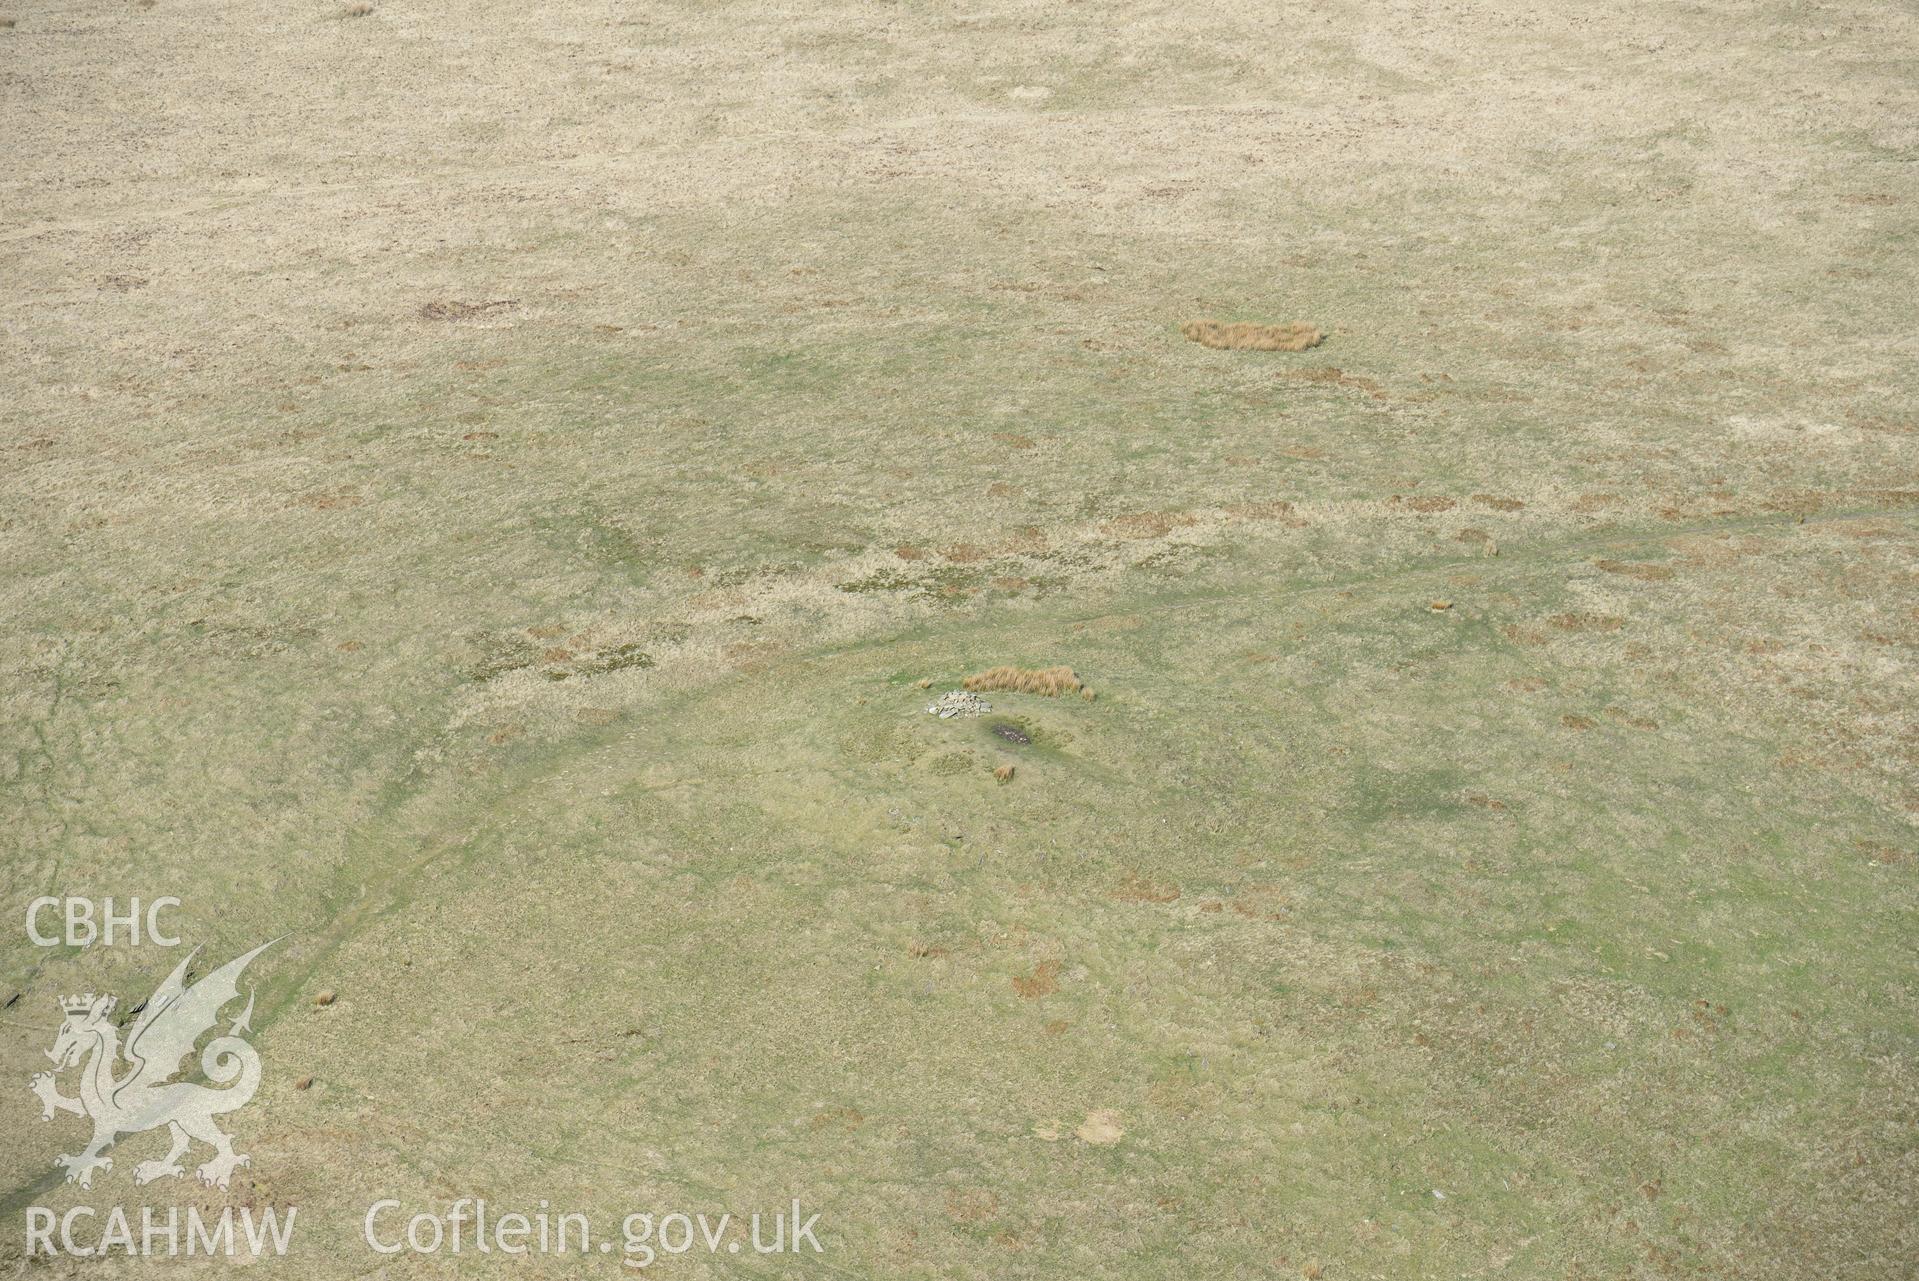 Foel Feddau, Cairn. Oblique aerial photograph taken during the Royal Commission's programme of archaeological aerial reconnaissance by Toby Driver on 15th April 2015.